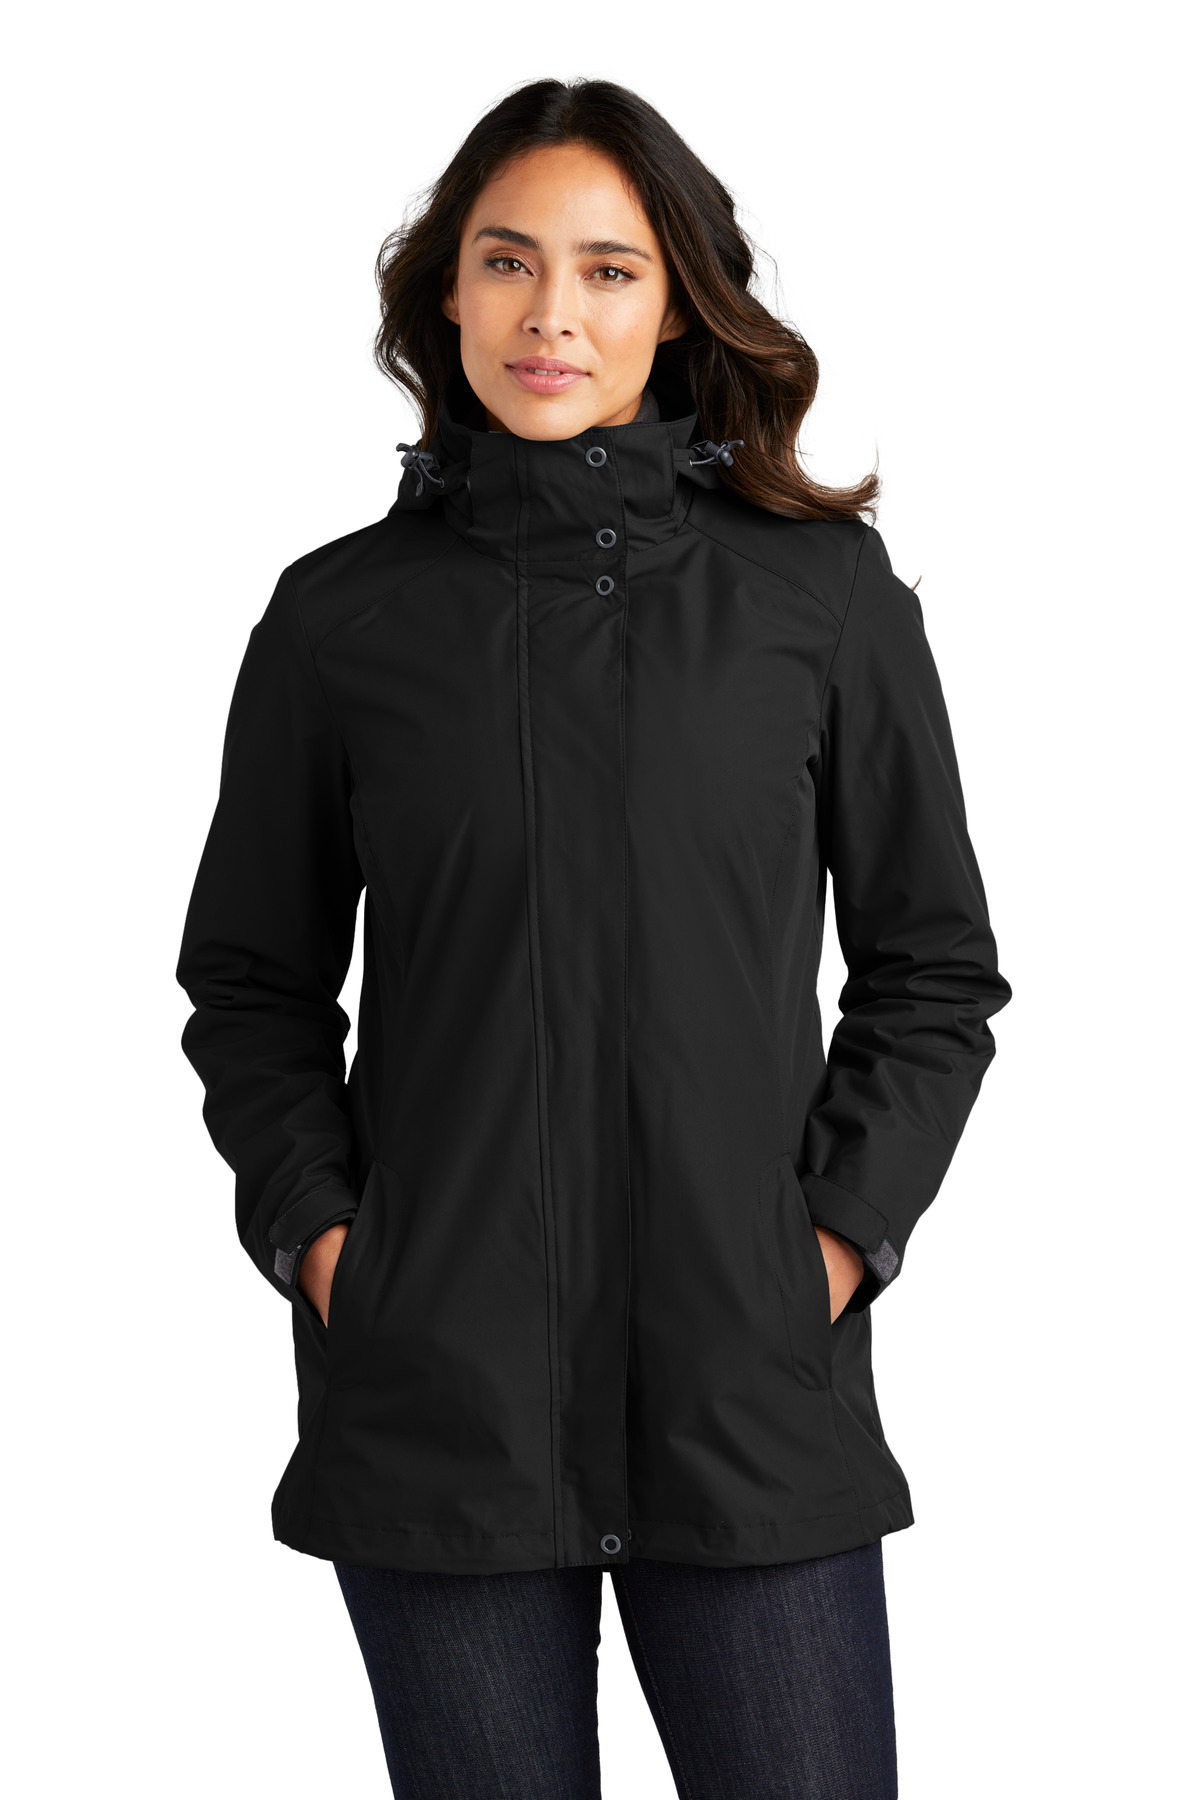 Port Authority Ladies All-Weather 3-in-1 Jacket-